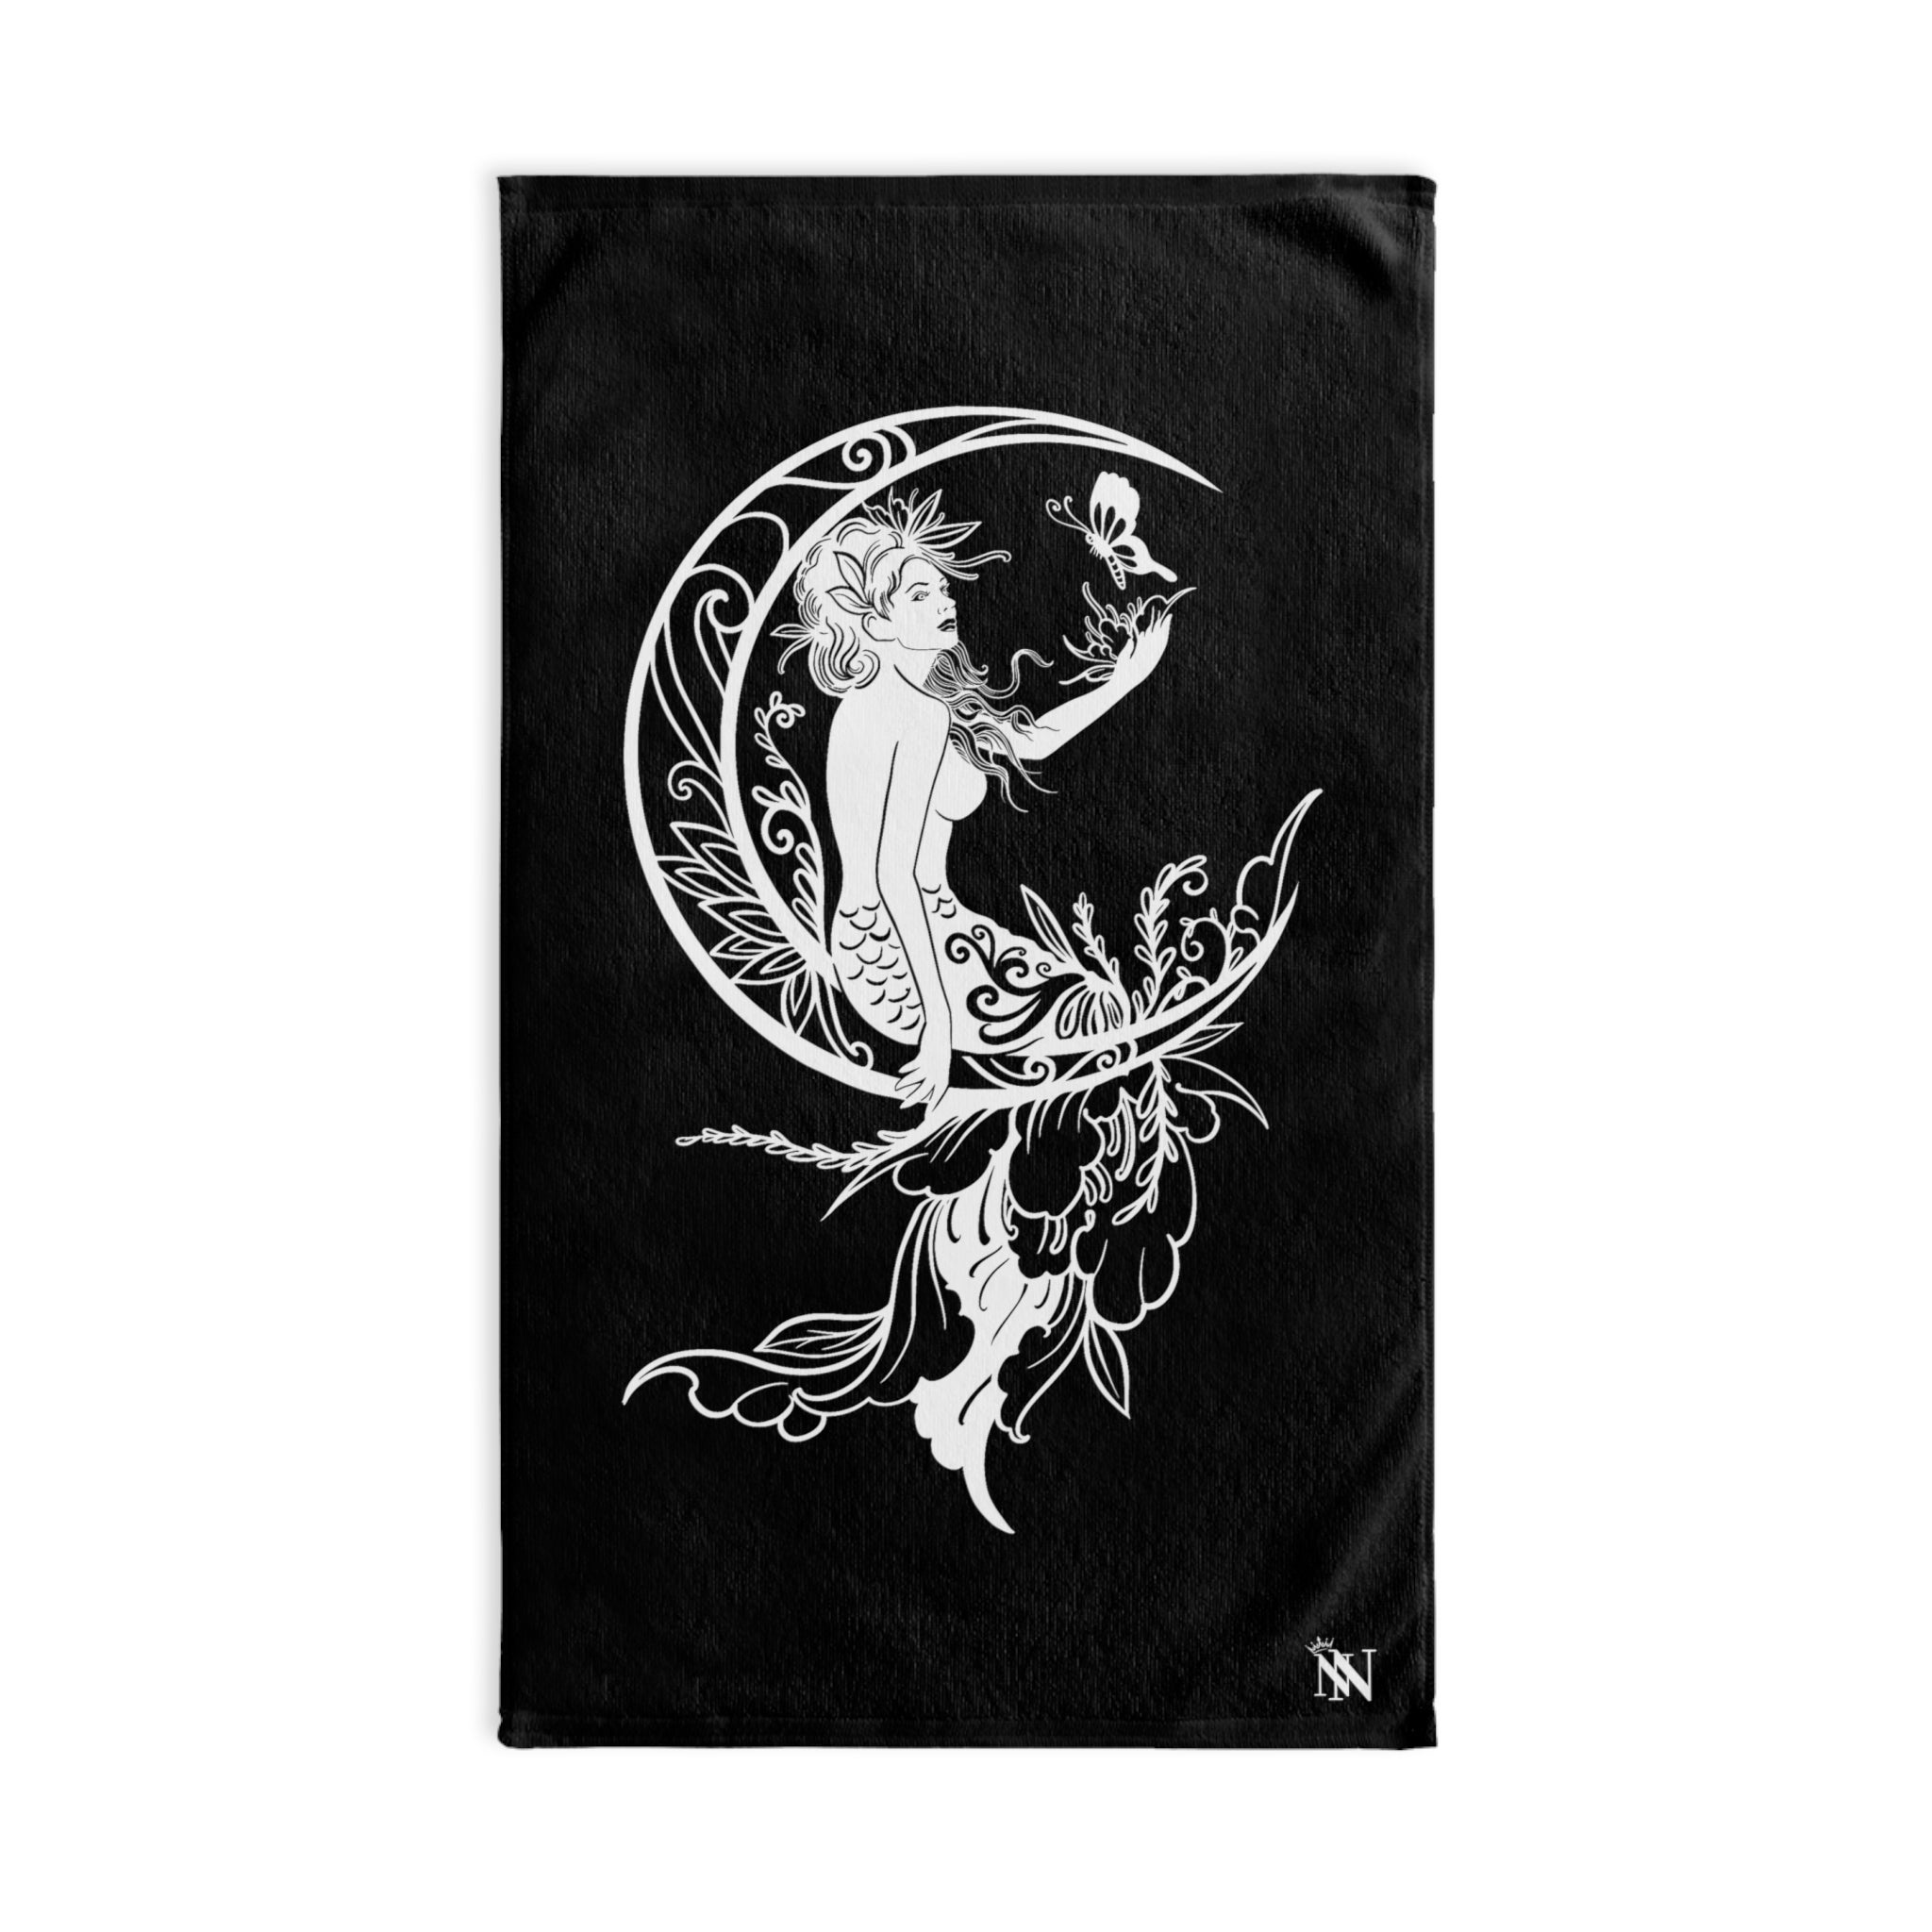 Moon Mermaid StarBlack | Sexy Gifts for Boyfriend, Funny Towel Romantic Gift for Wedding Couple Fiance First Year 2nd Anniversary Valentines, Party Gag Gifts, Joke Humor Cloth for Husband Men BF NECTAR NAPKINS